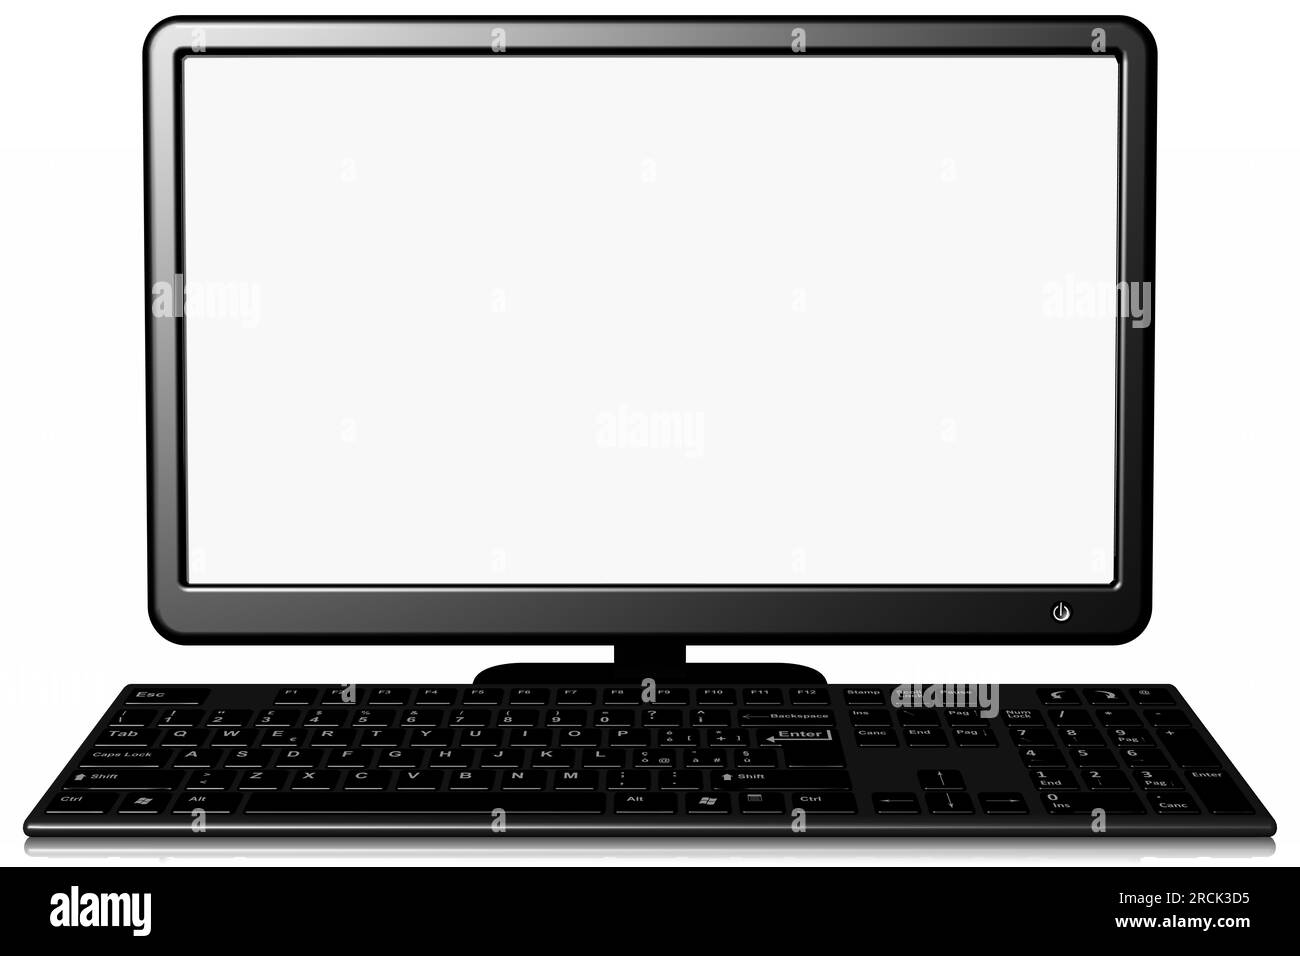 Pc. Computer. Desktop isolated on white background suitable for inserting text and images into the screen. Stock Photo